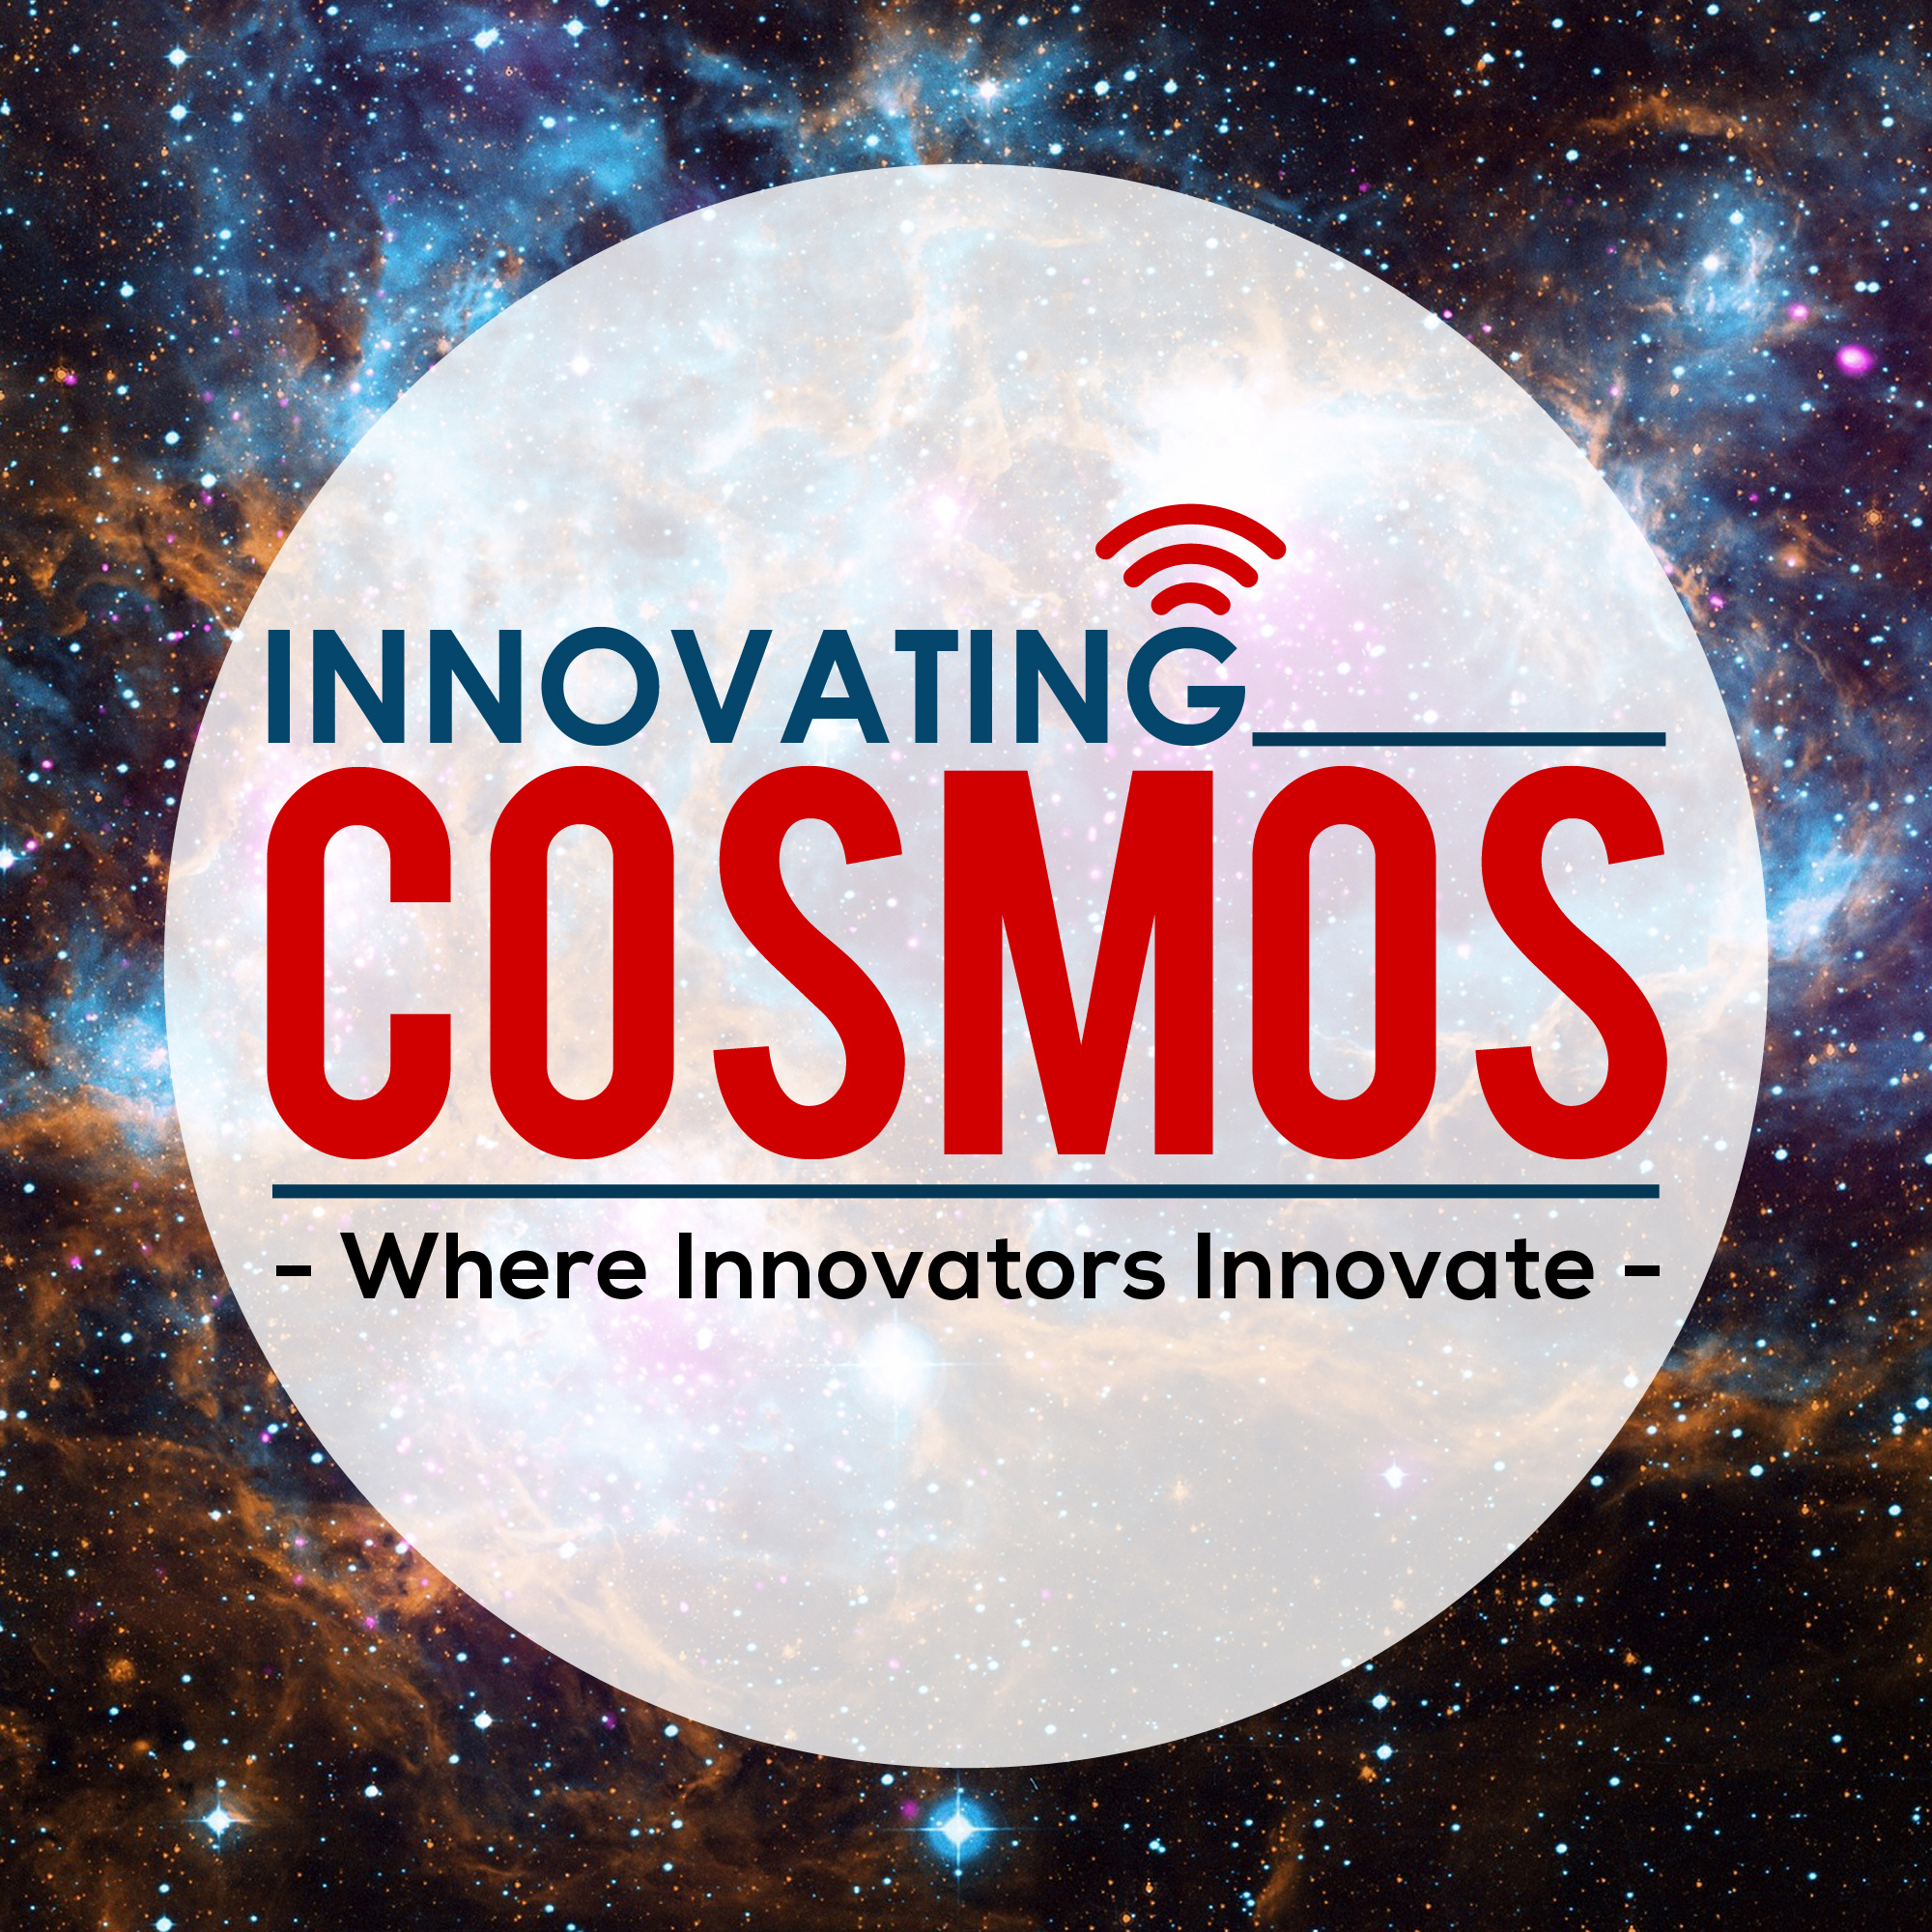 Ep15: Innovating Cosmos: transforming the world step-by-step